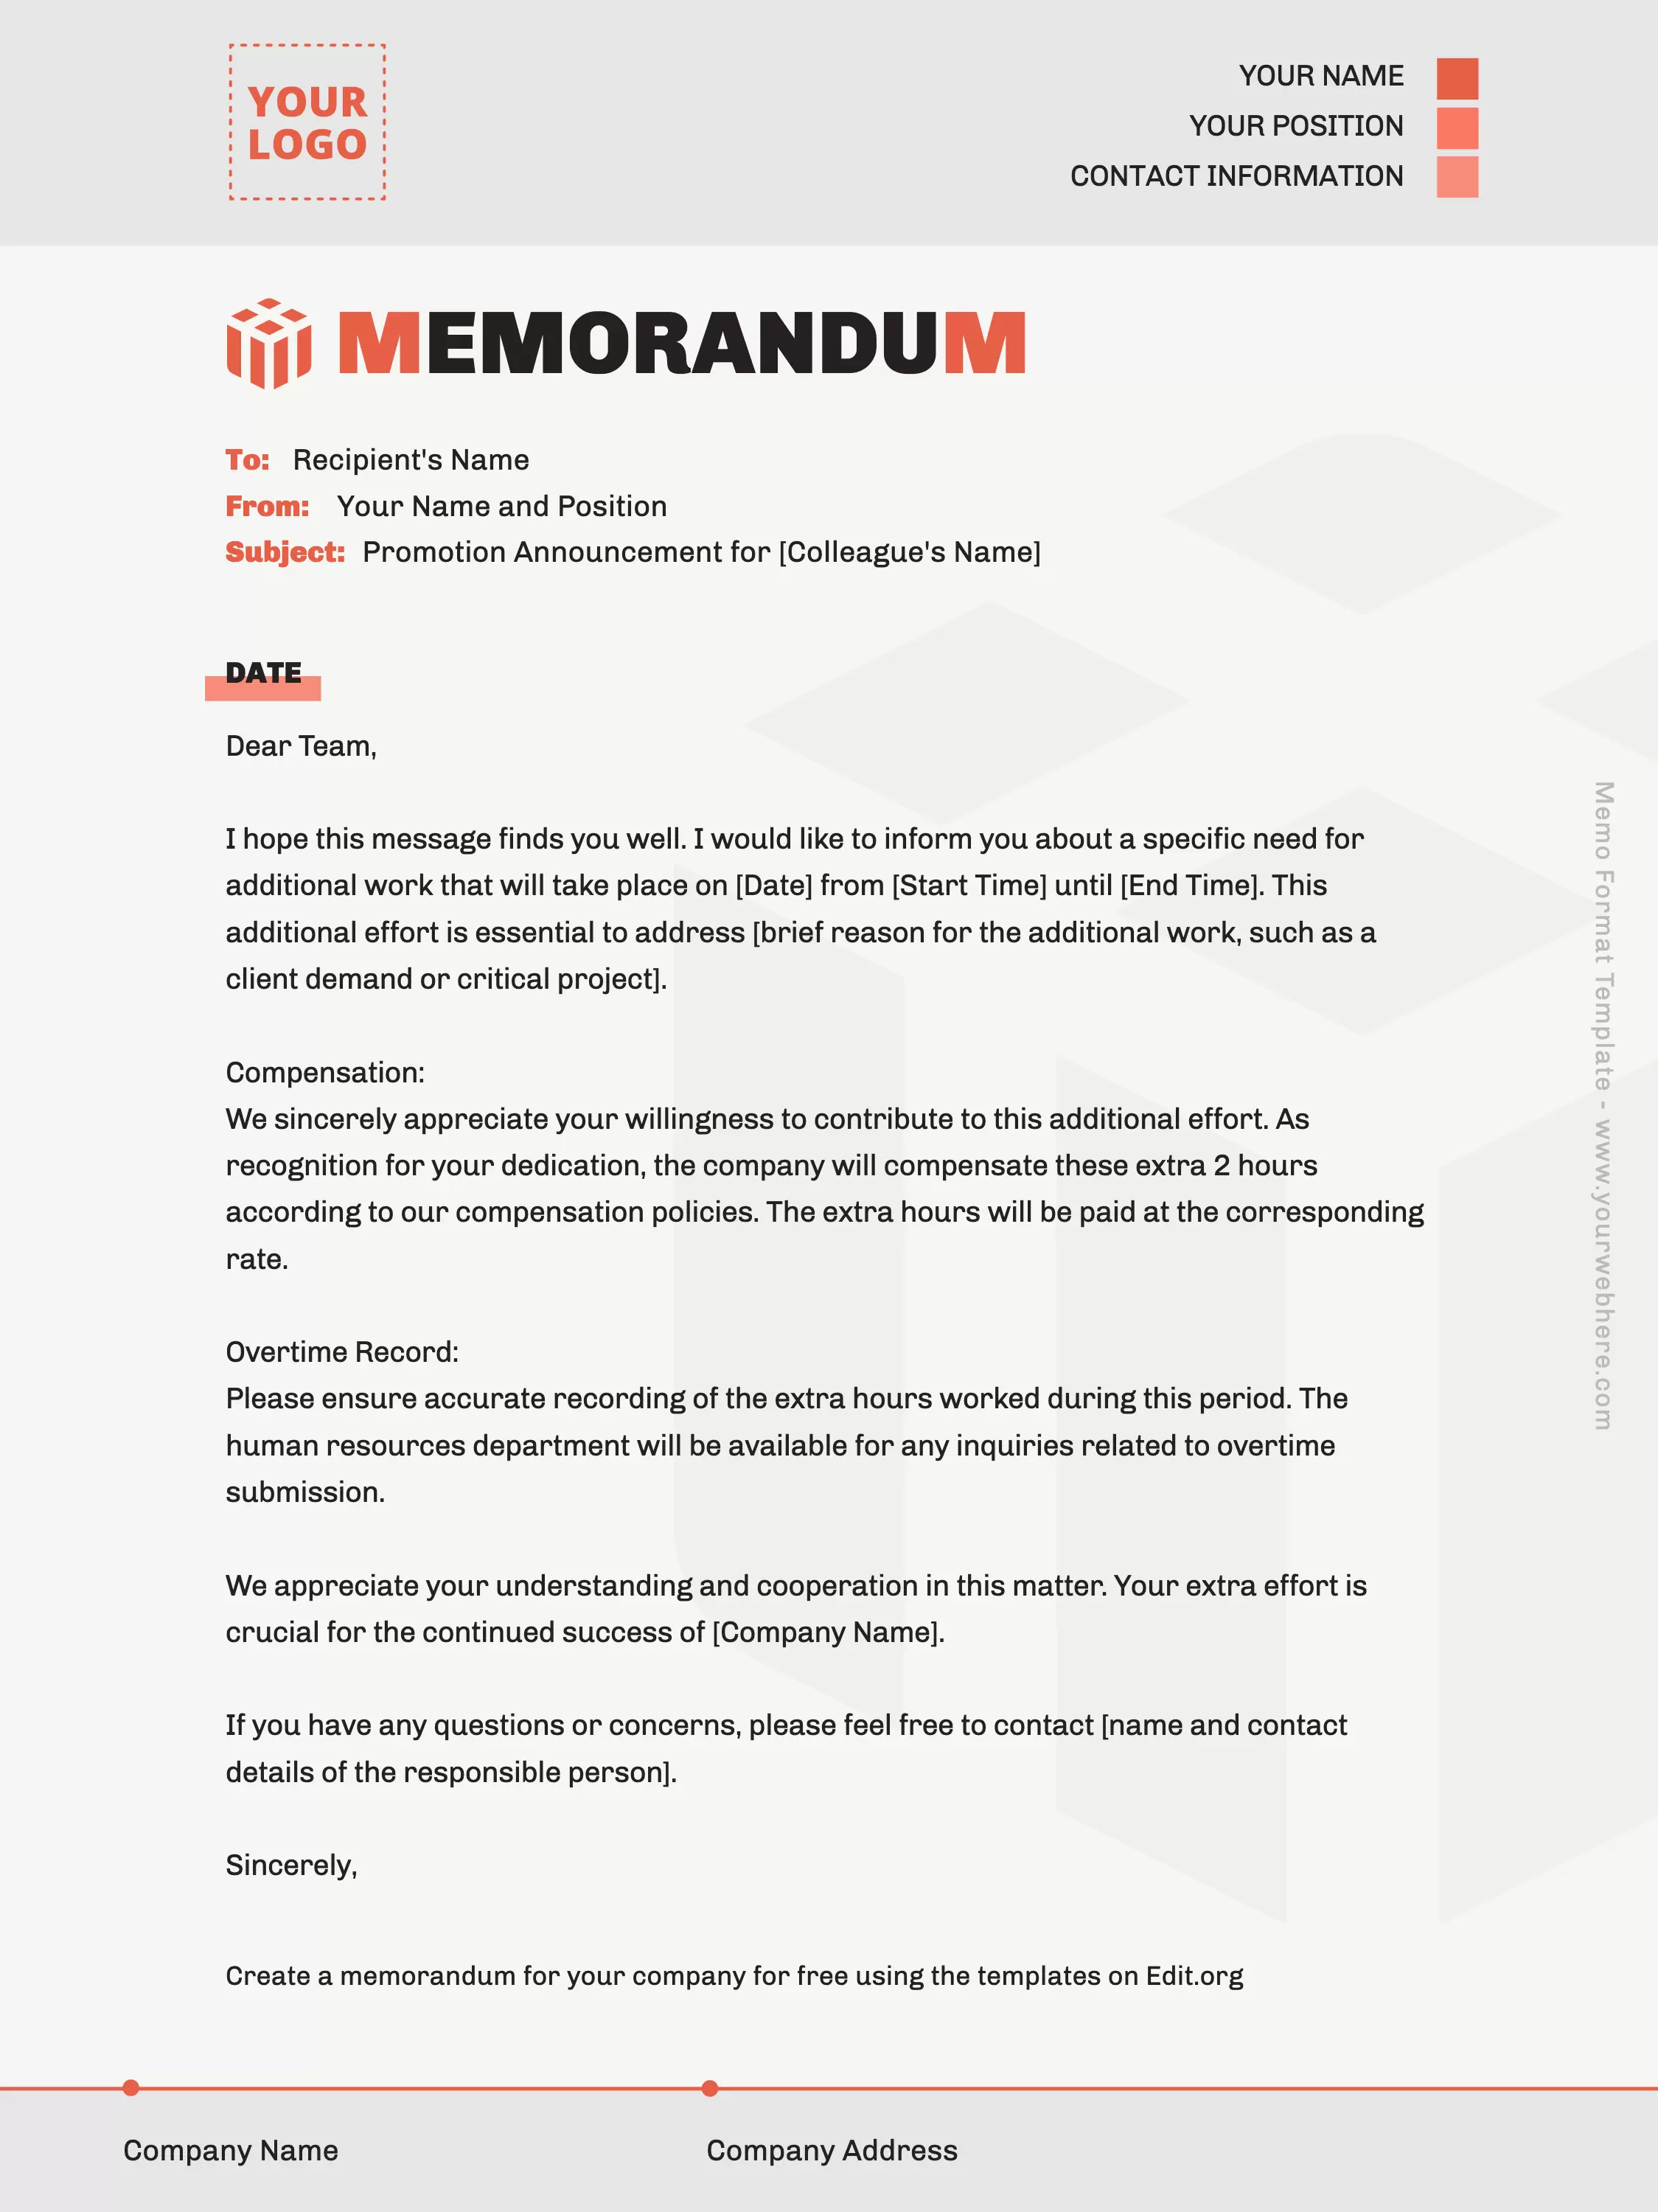 Printable example of Memo format for business